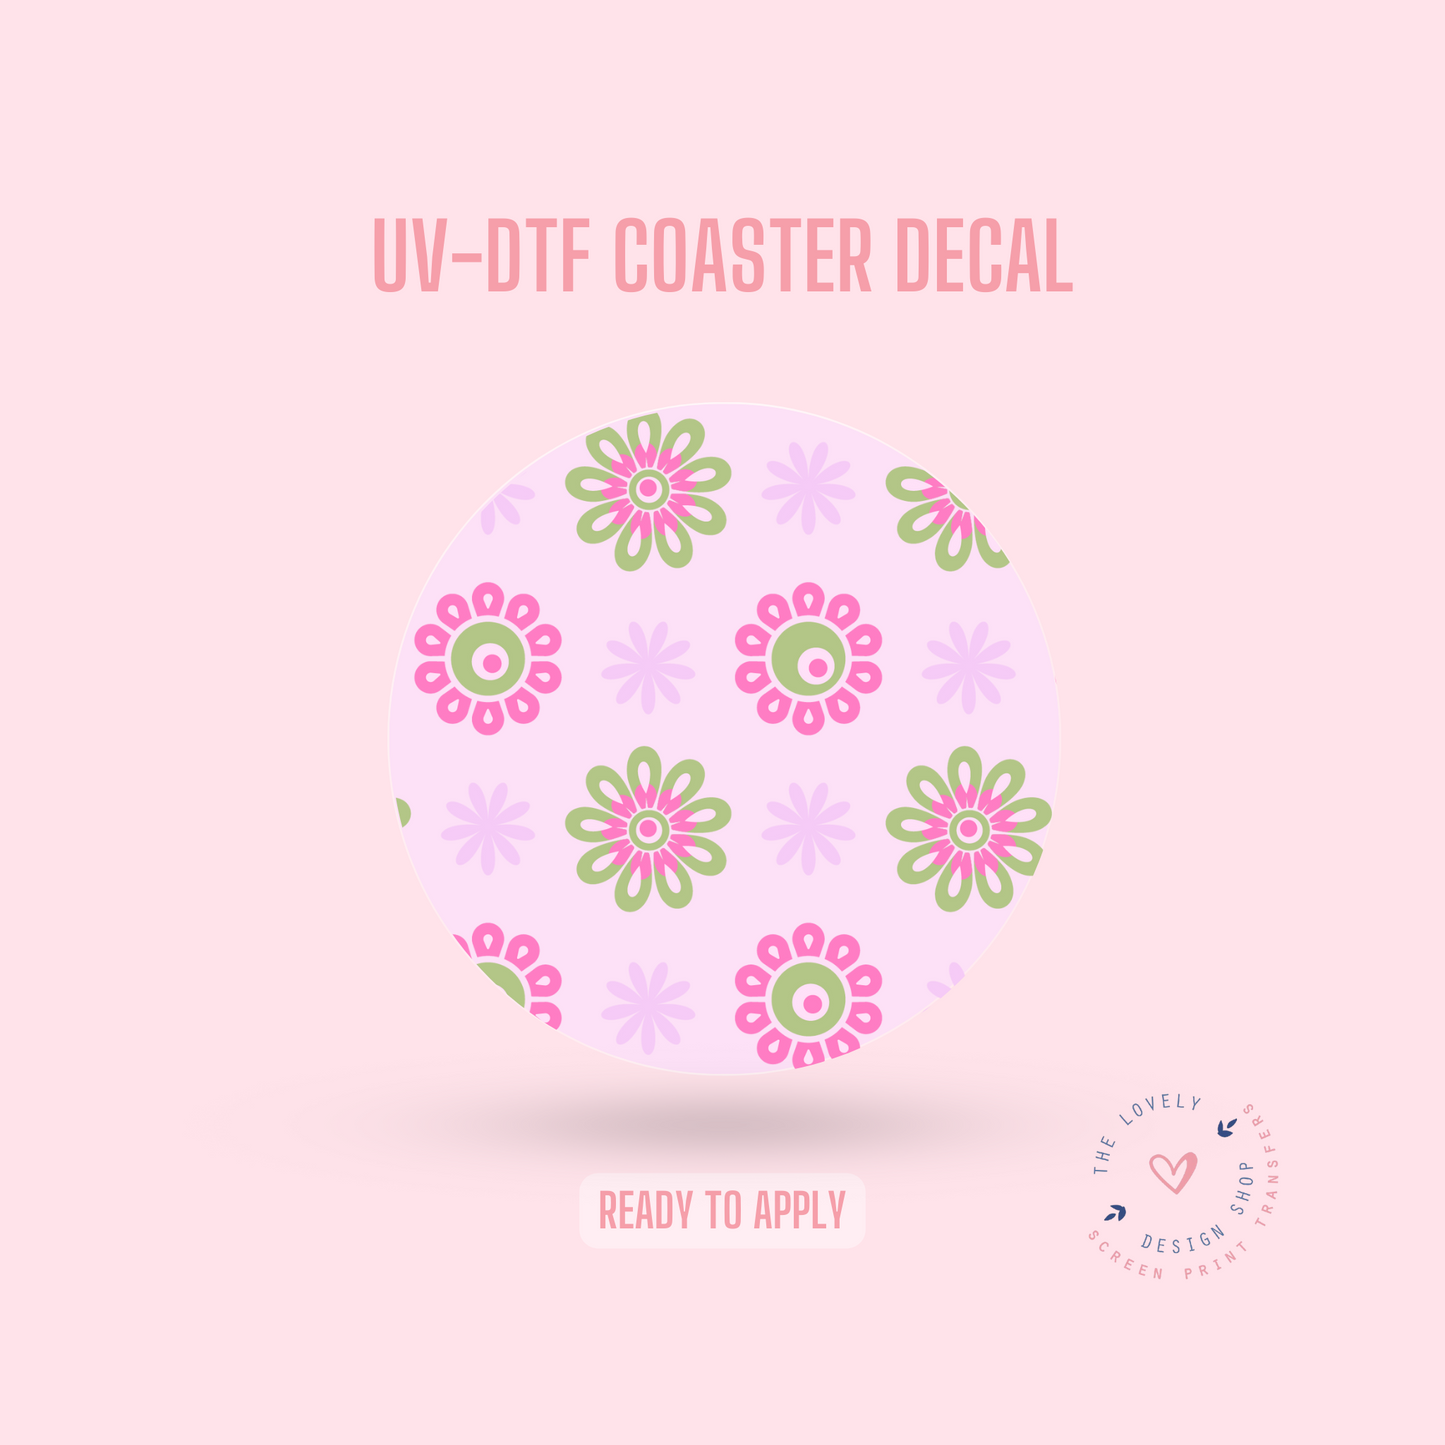 Cutie Flowers - UV DTF Coaster Decal (Ready to Ship) Apr 29